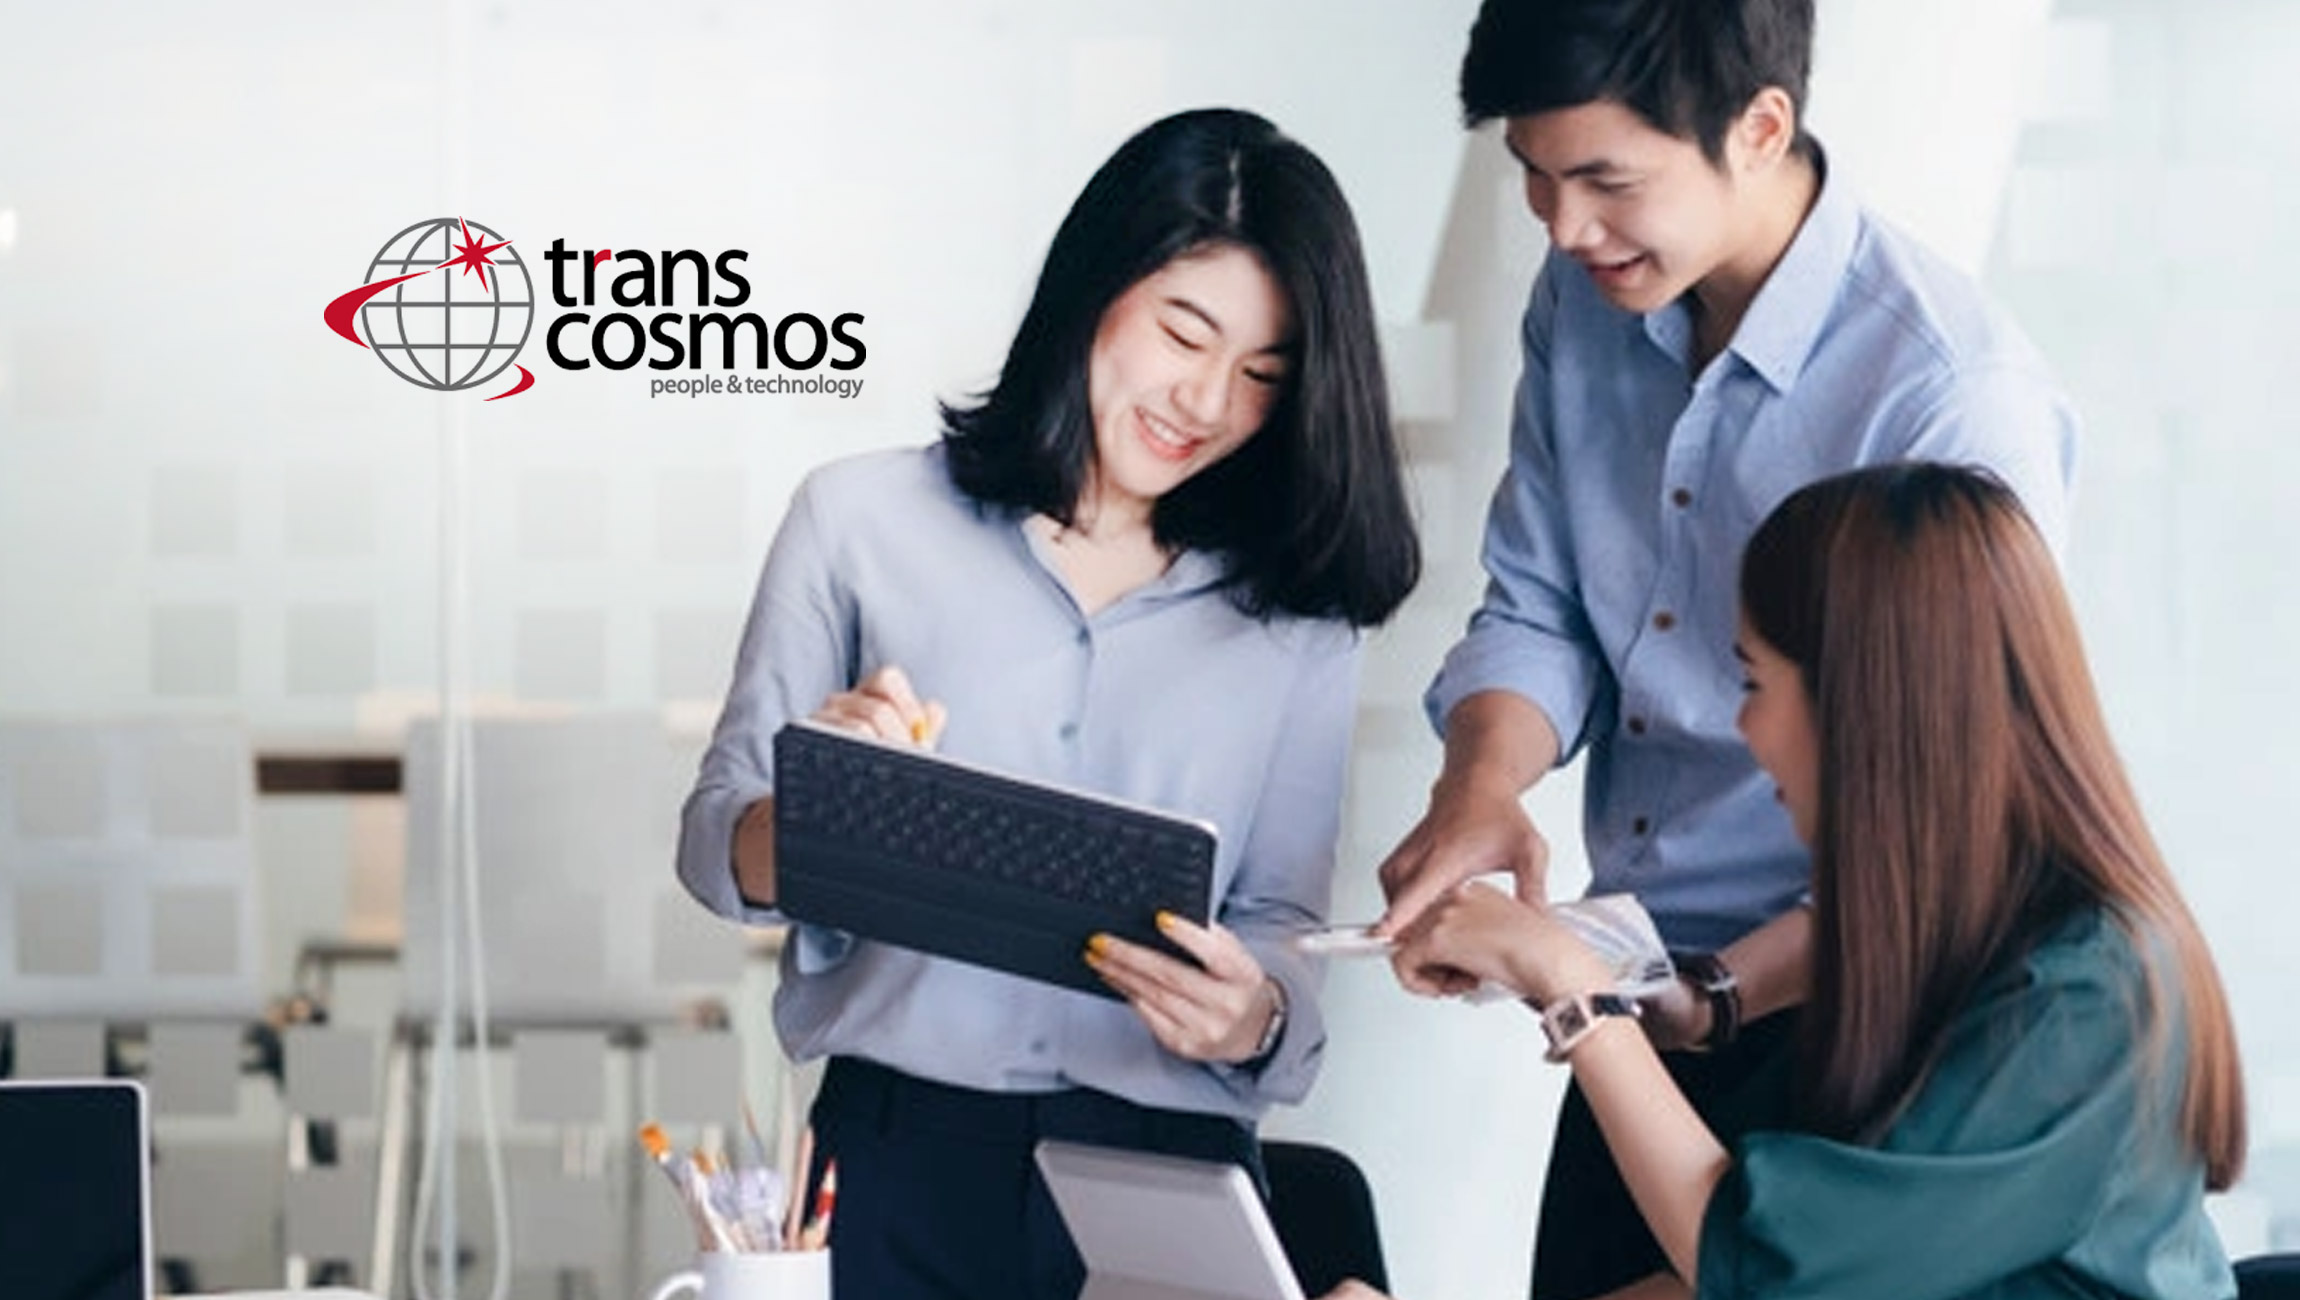 transcosmos Named a Leader in APAC Customer Experience Management Provider by Everest Group in its Customer Experience Management Provider Research